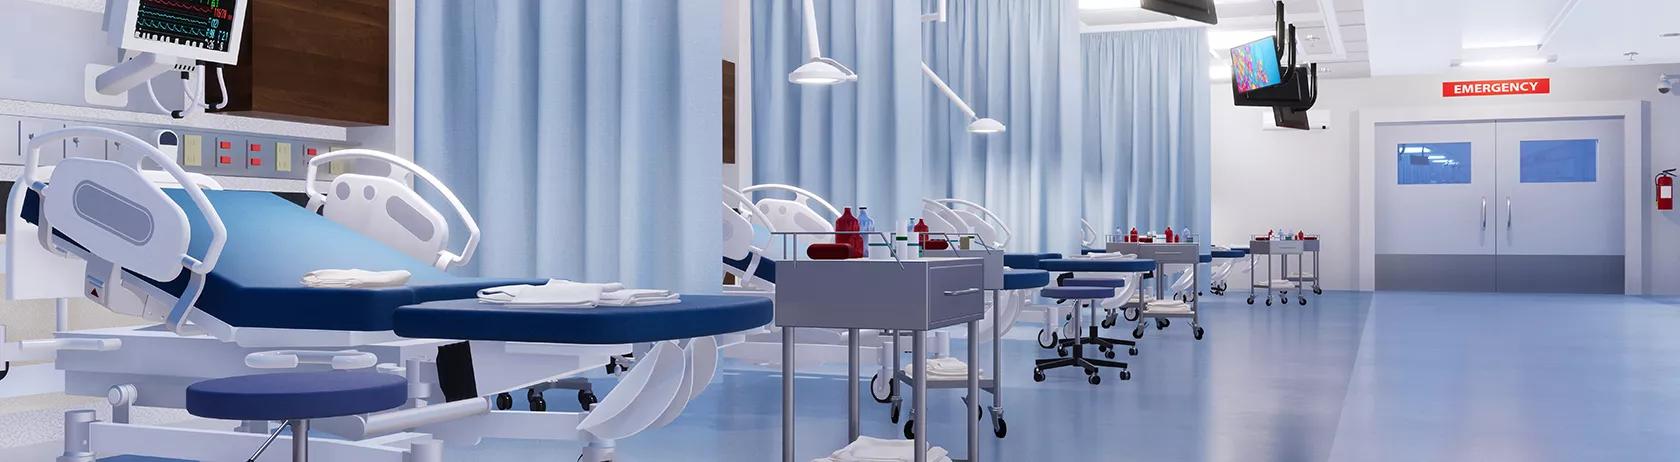 Hospital beds, hospital chairs and medical cabinets